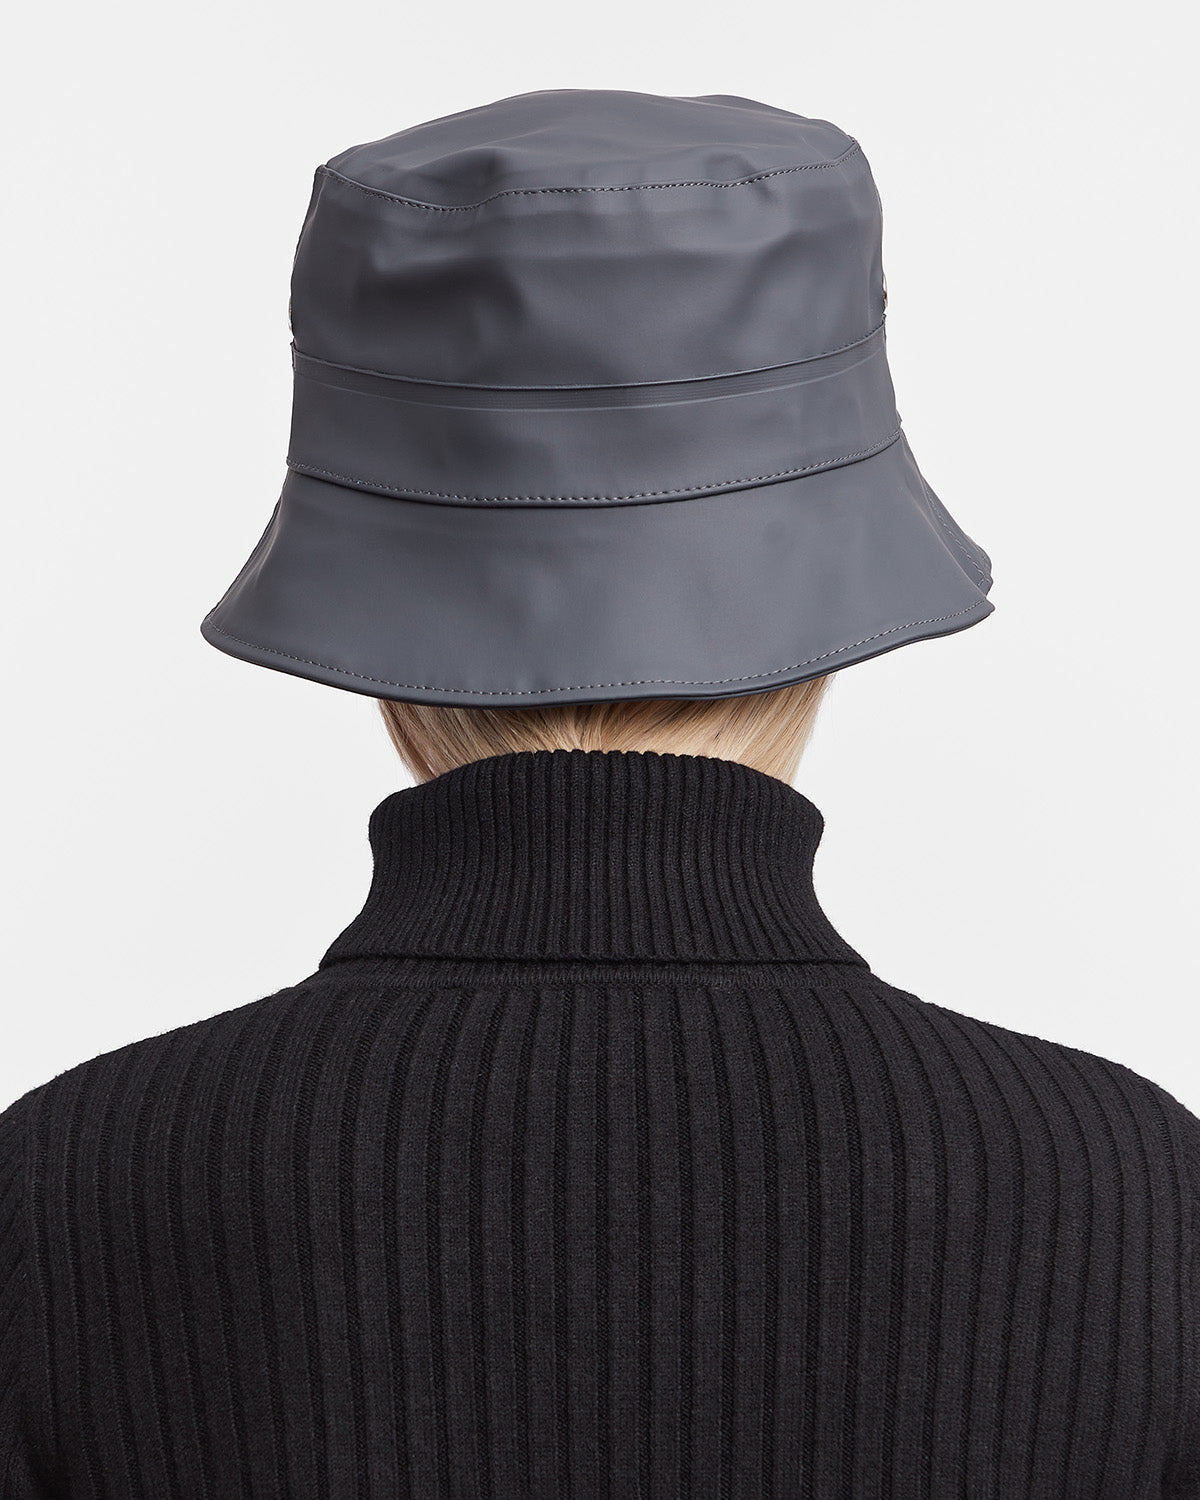 A woman with Bucket Hat in color charcoal by Stutterheim seen from behind